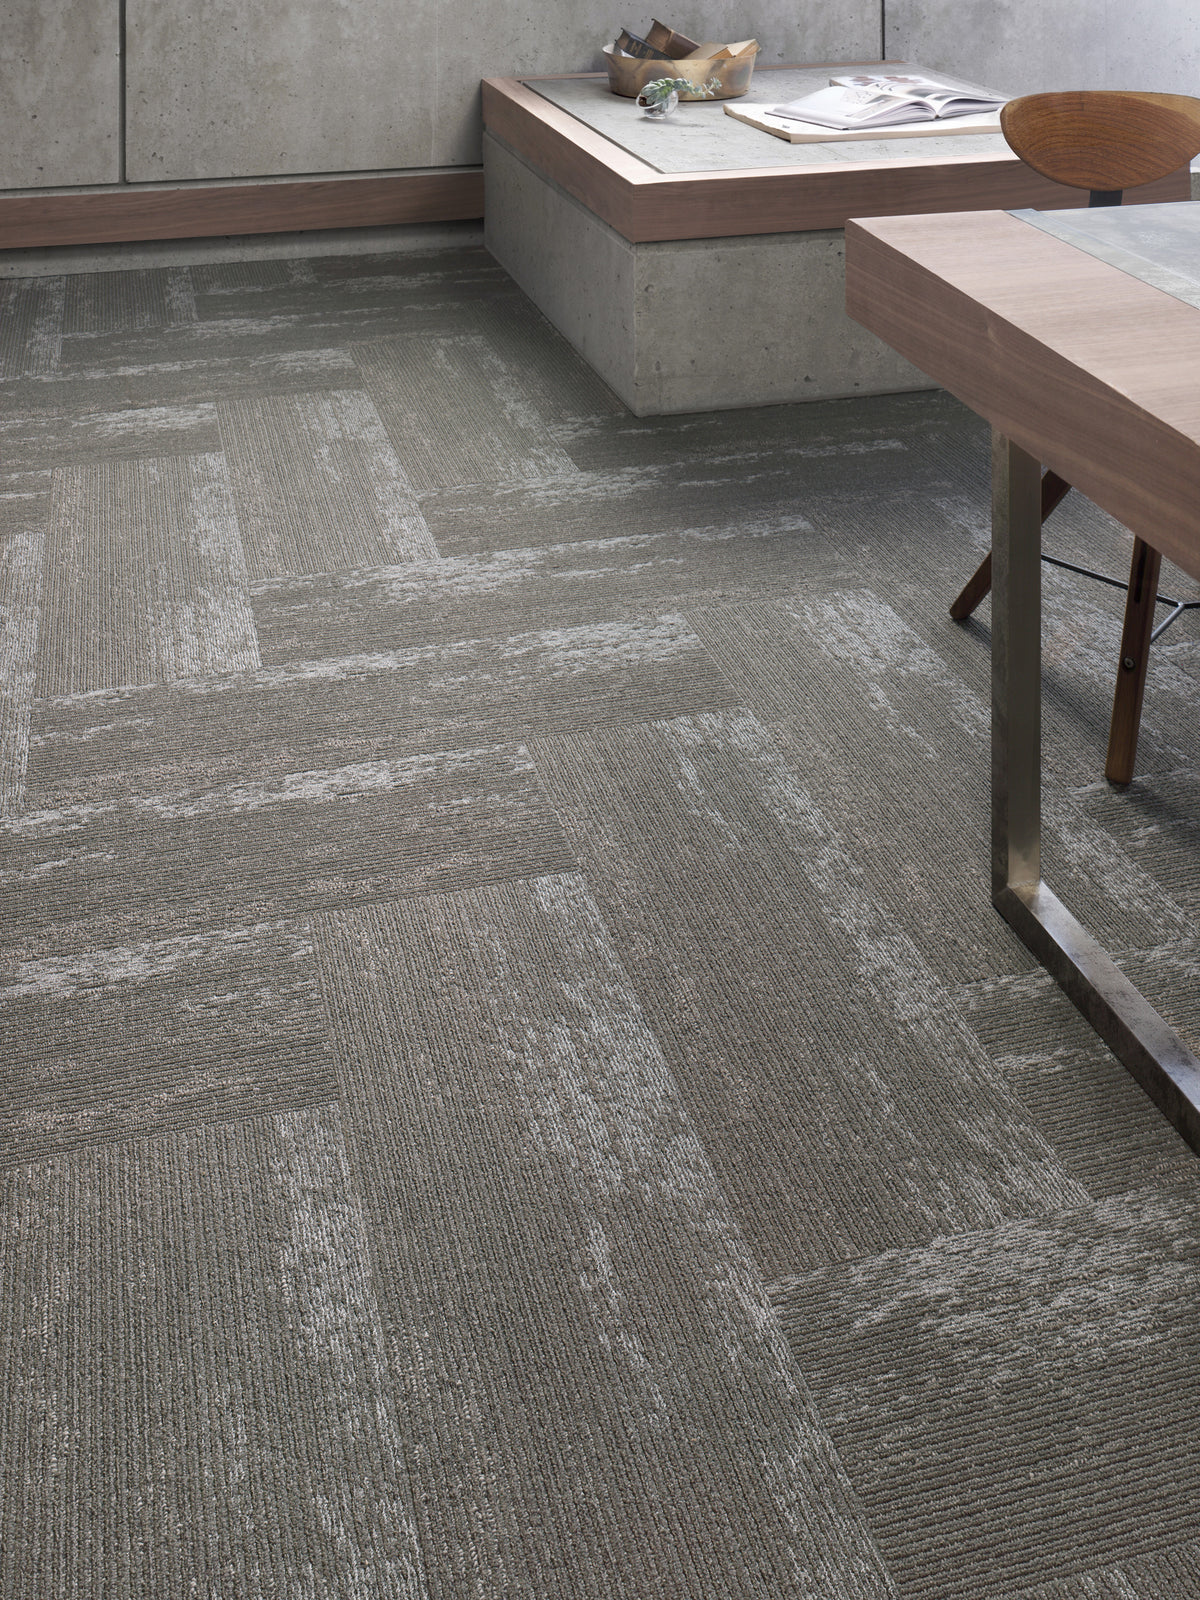 Mohawk Group - Iconic Earth - Metalmorphic - Commercial Carpet Tile - Downing Stone Metall